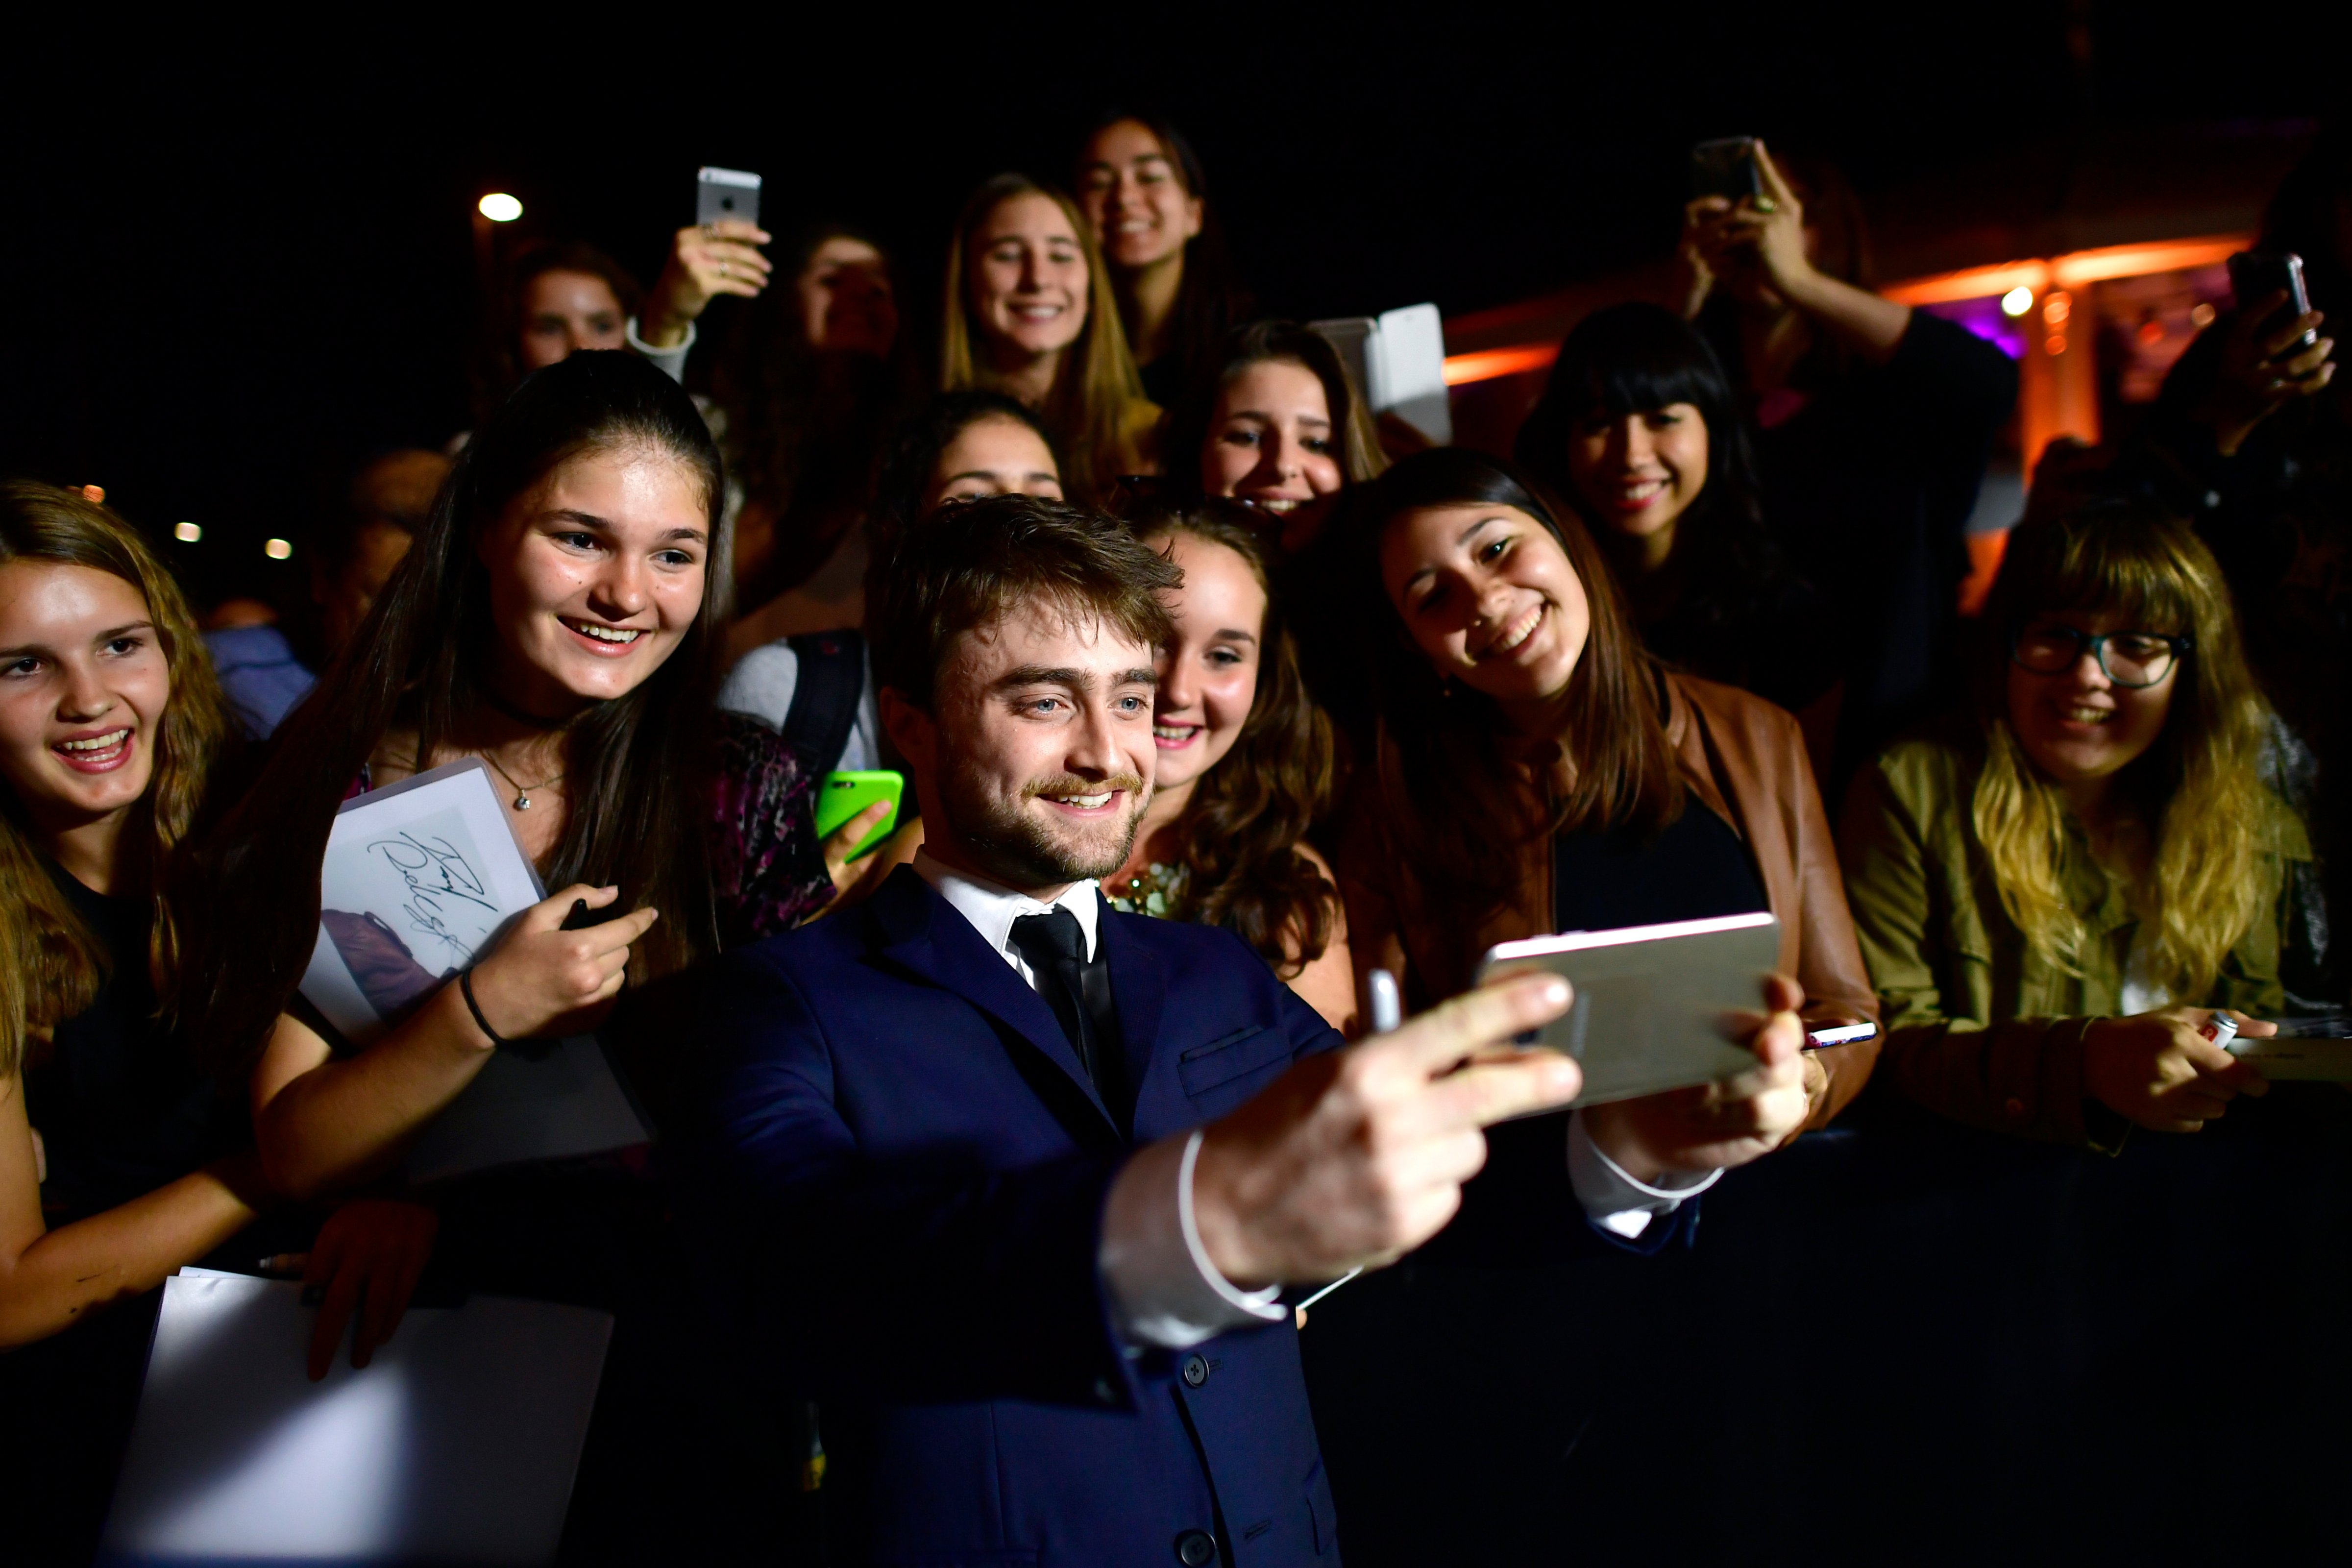 Daniel Radcliffe writes autographs and takes selfies with fans as he attends the 'Imperium' premiere during the 12th Zurich Film Festival on September 30, 2016 in Zurich, Switzerland. (Alexander Koerner—Getty Images)